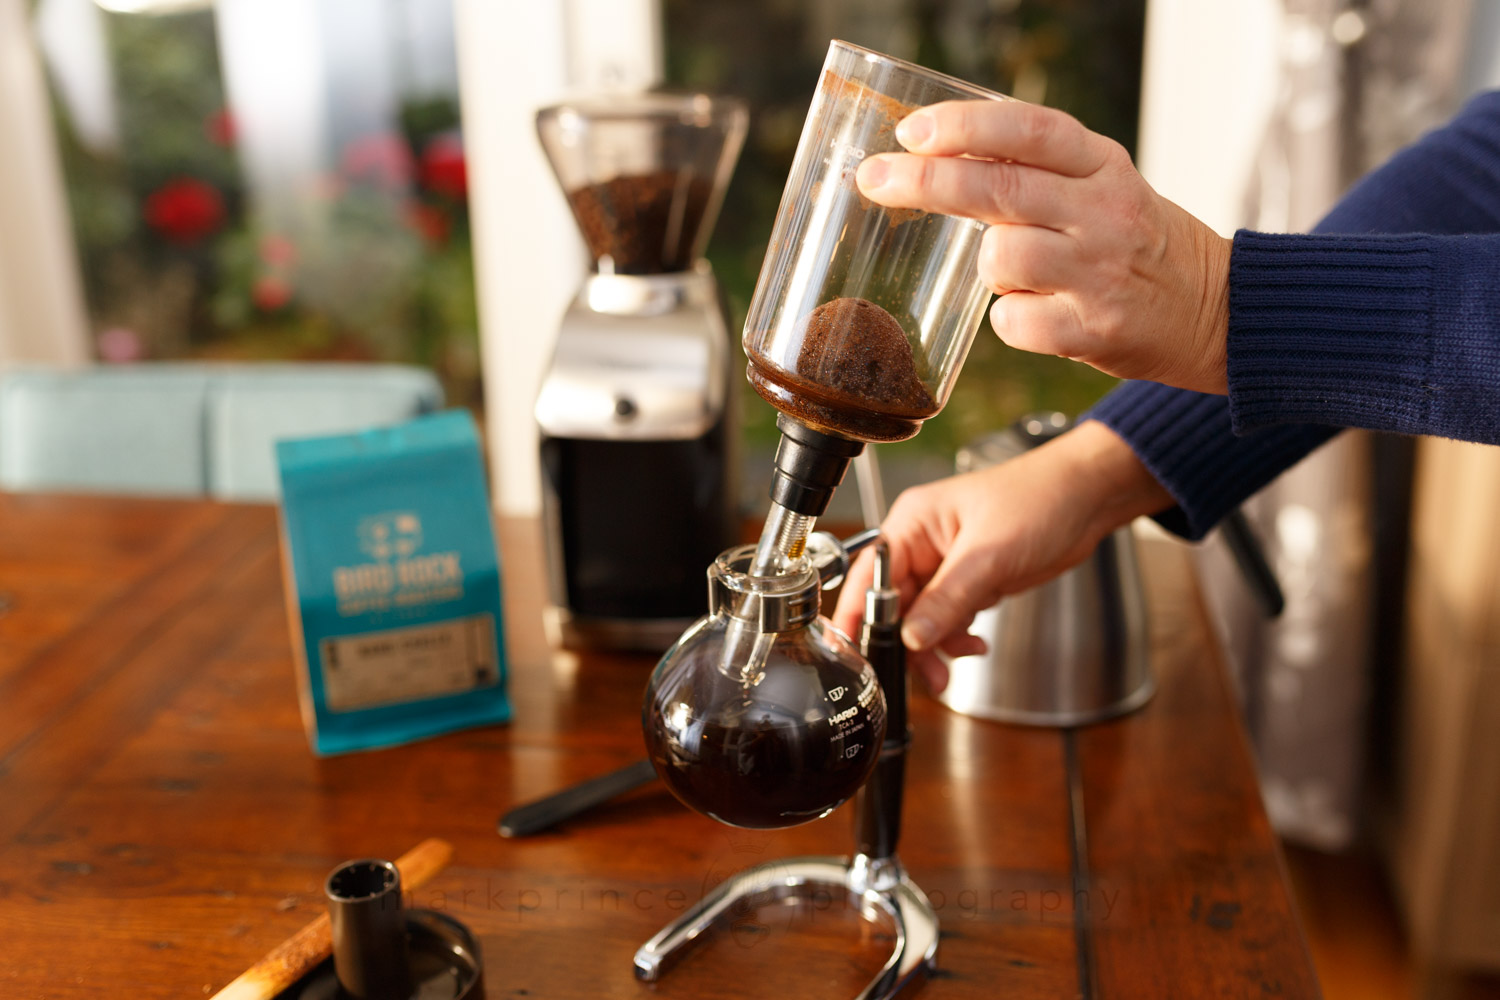 How To Brew Coffee Using A Vacuum Siphon Coffee Maker: Recipe Included -  Baked, Brewed, Beautiful